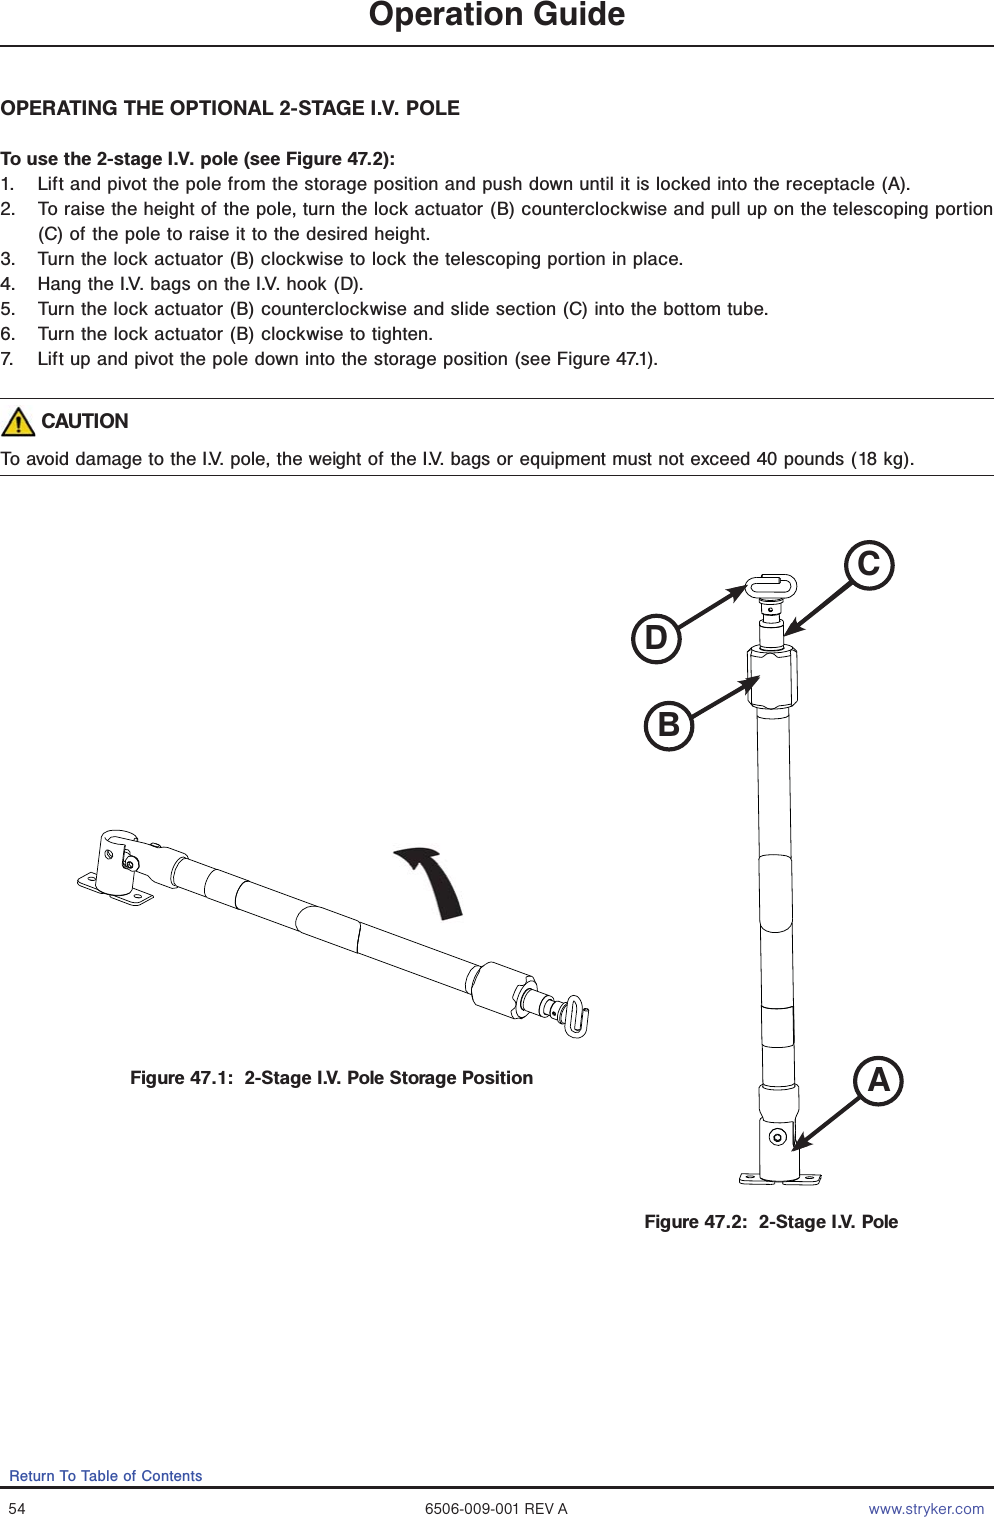 54 6506-009-001 REV A www.stryker.comReturn To Table of ContentsOperation GuideOPERATING THE OPTIONAL 2-STAGE I.V. POLETo use the 2-stage I.V. pole (see Figure 47.2):1.  Lift and pivot the pole from the storage position and push down until it is locked into the receptacle (A).2.  To raise the height of the pole, turn the lock actuator (B) counterclockwise and pull up on the telescoping portion (C) of the pole to raise it to the desired height.3.  Turn the lock actuator (B) clockwise to lock the telescoping portion in place.4.  Hang the I.V. bags on the I.V. hook (D).5.  Turn the lock actuator (B) counterclockwise and slide section (C) into the bottom tube.6.  Turn the lock actuator (B) clockwise to tighten.7.  Lift up and pivot the pole down into the storage position (see Figure 47.1). CAUTIONTo avoid damage to the I.V. pole, the weight of the I.V. bags or equipment must not exceed 40 pounds (18 kg).Figure 47.1:  2-Stage I.V. Pole Storage PositionFigure 47.2:  2-Stage I.V. PoleCADBABCD